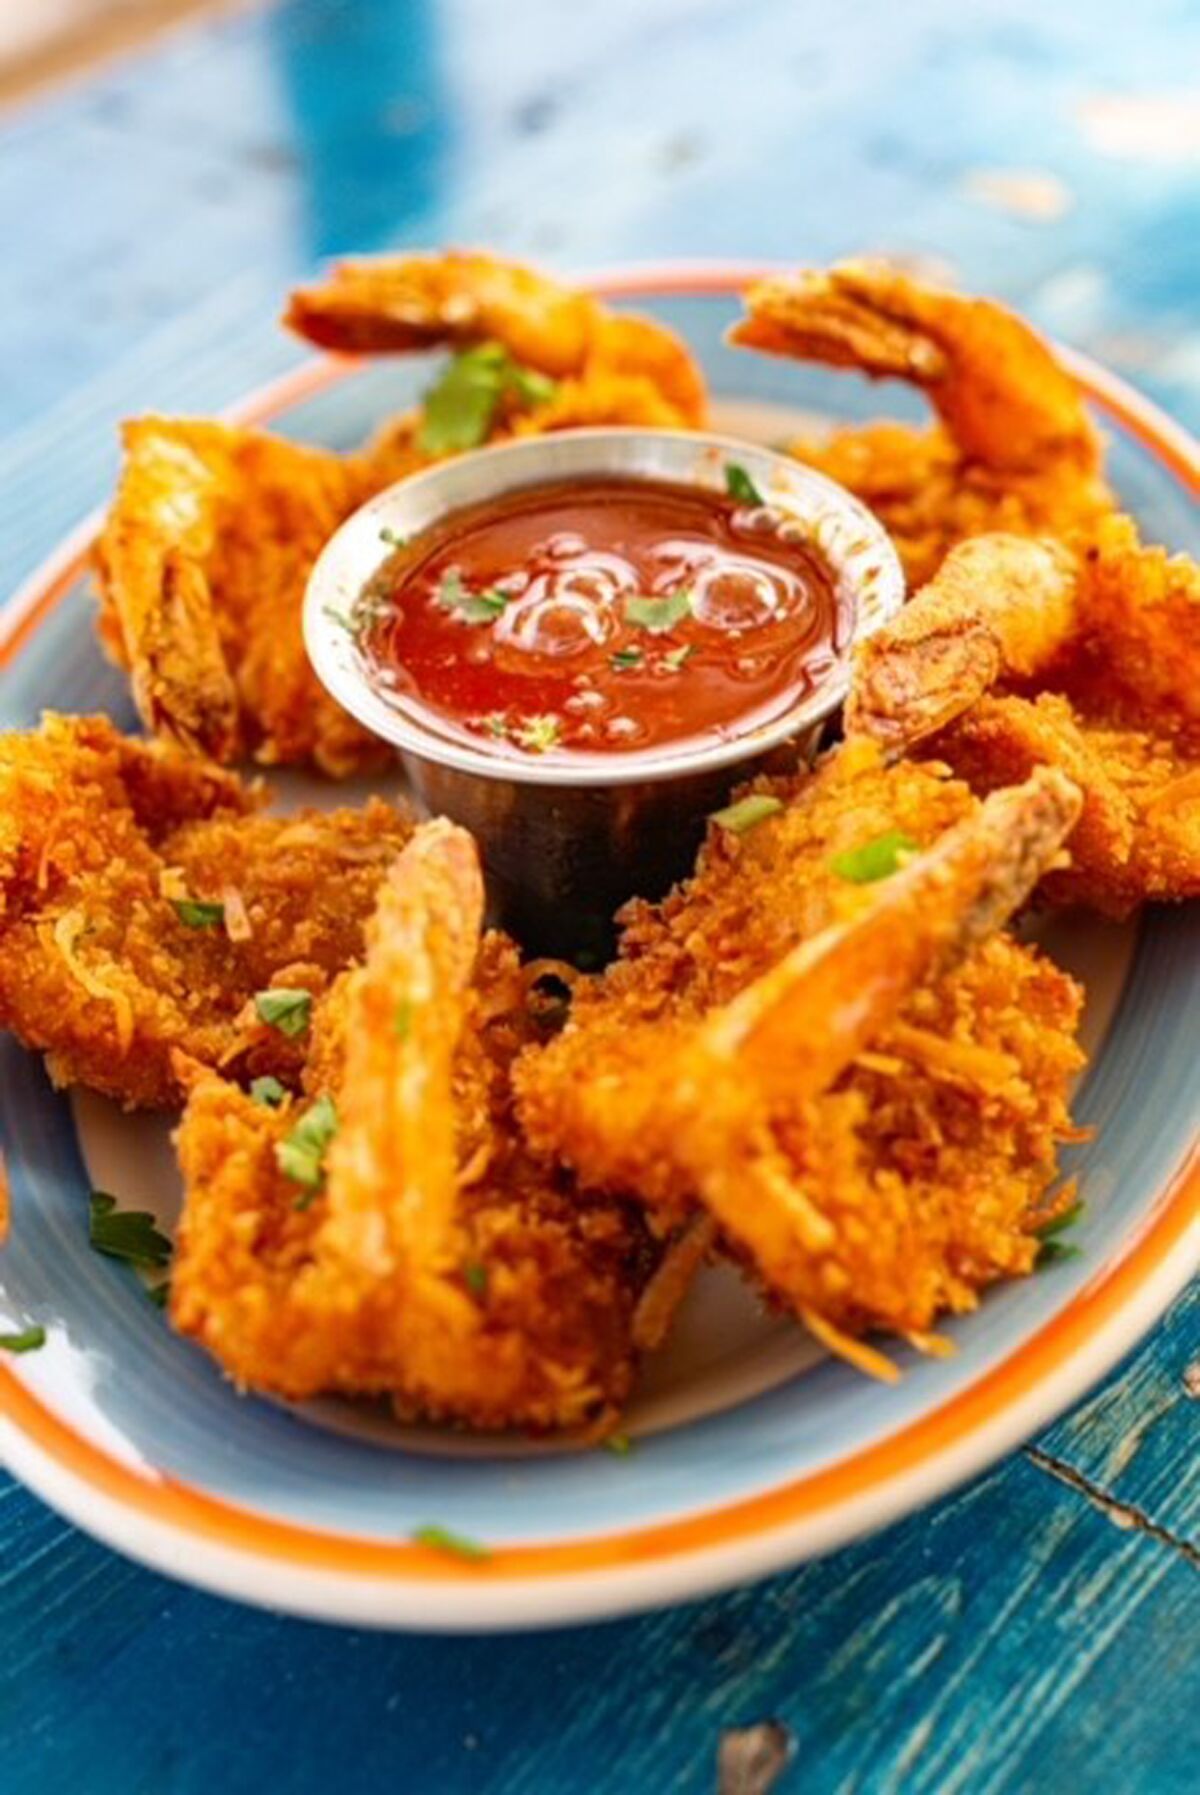 Plantain coconut shrimp is a signature dish at Miss B's Coconut Club in Pacific Beach.